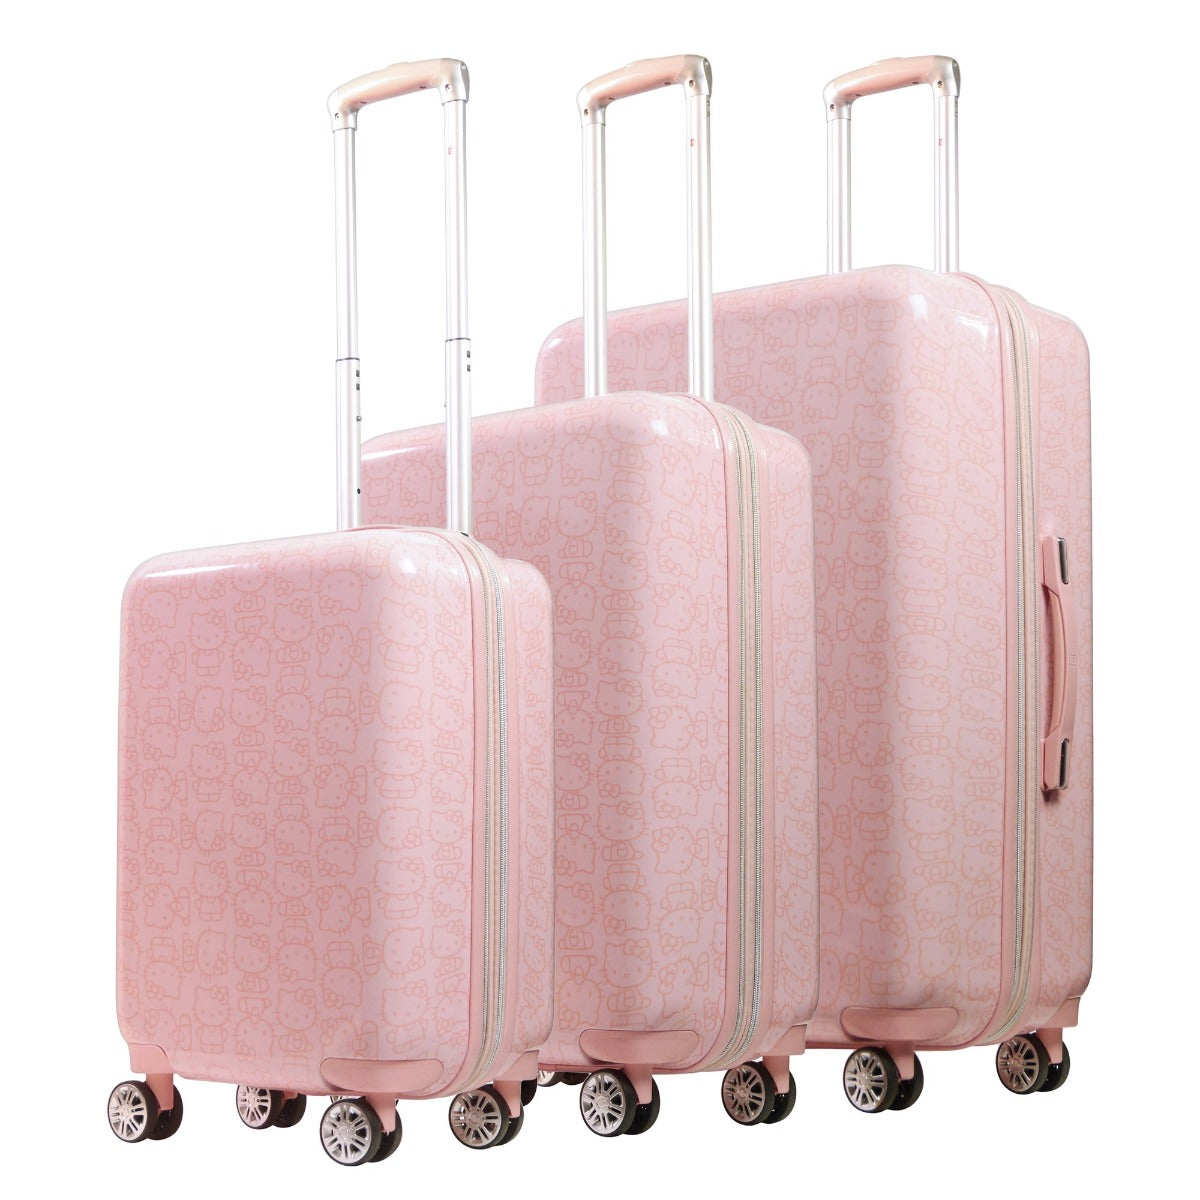 Barbie Hard Shell Luggage Case - Pink